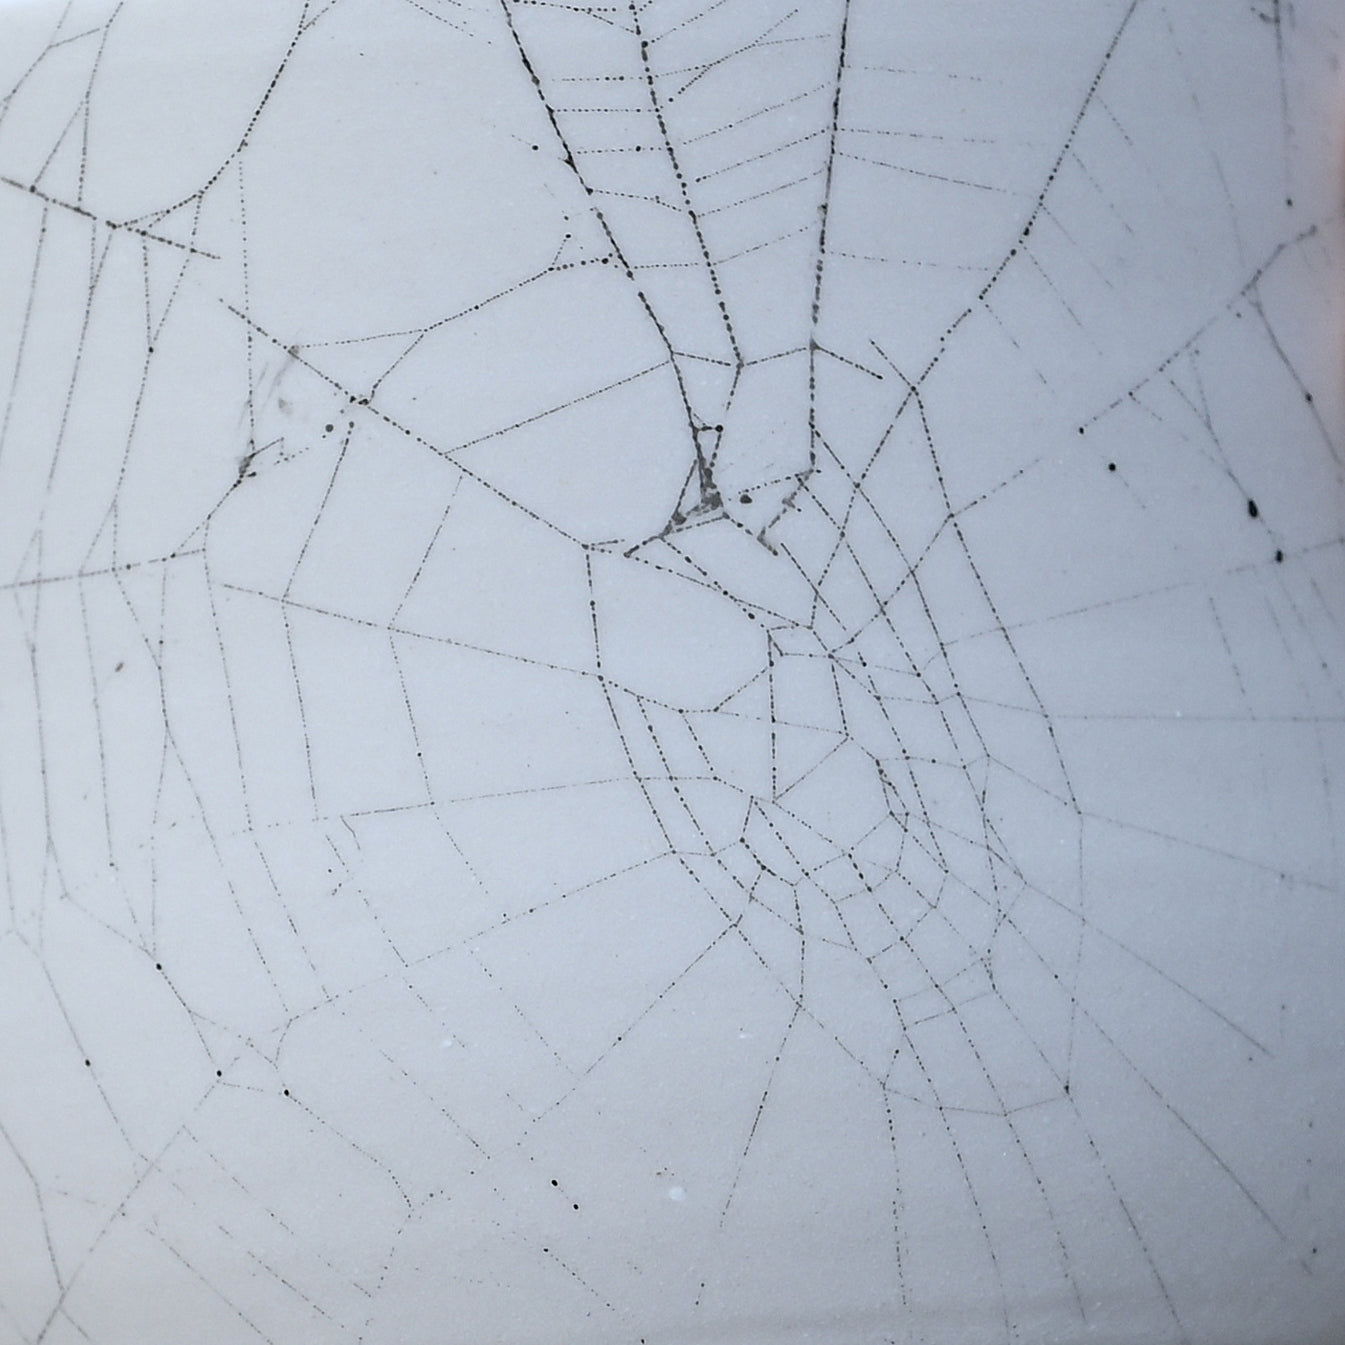 Web on Clay (244), Web Collected October 29, 2022